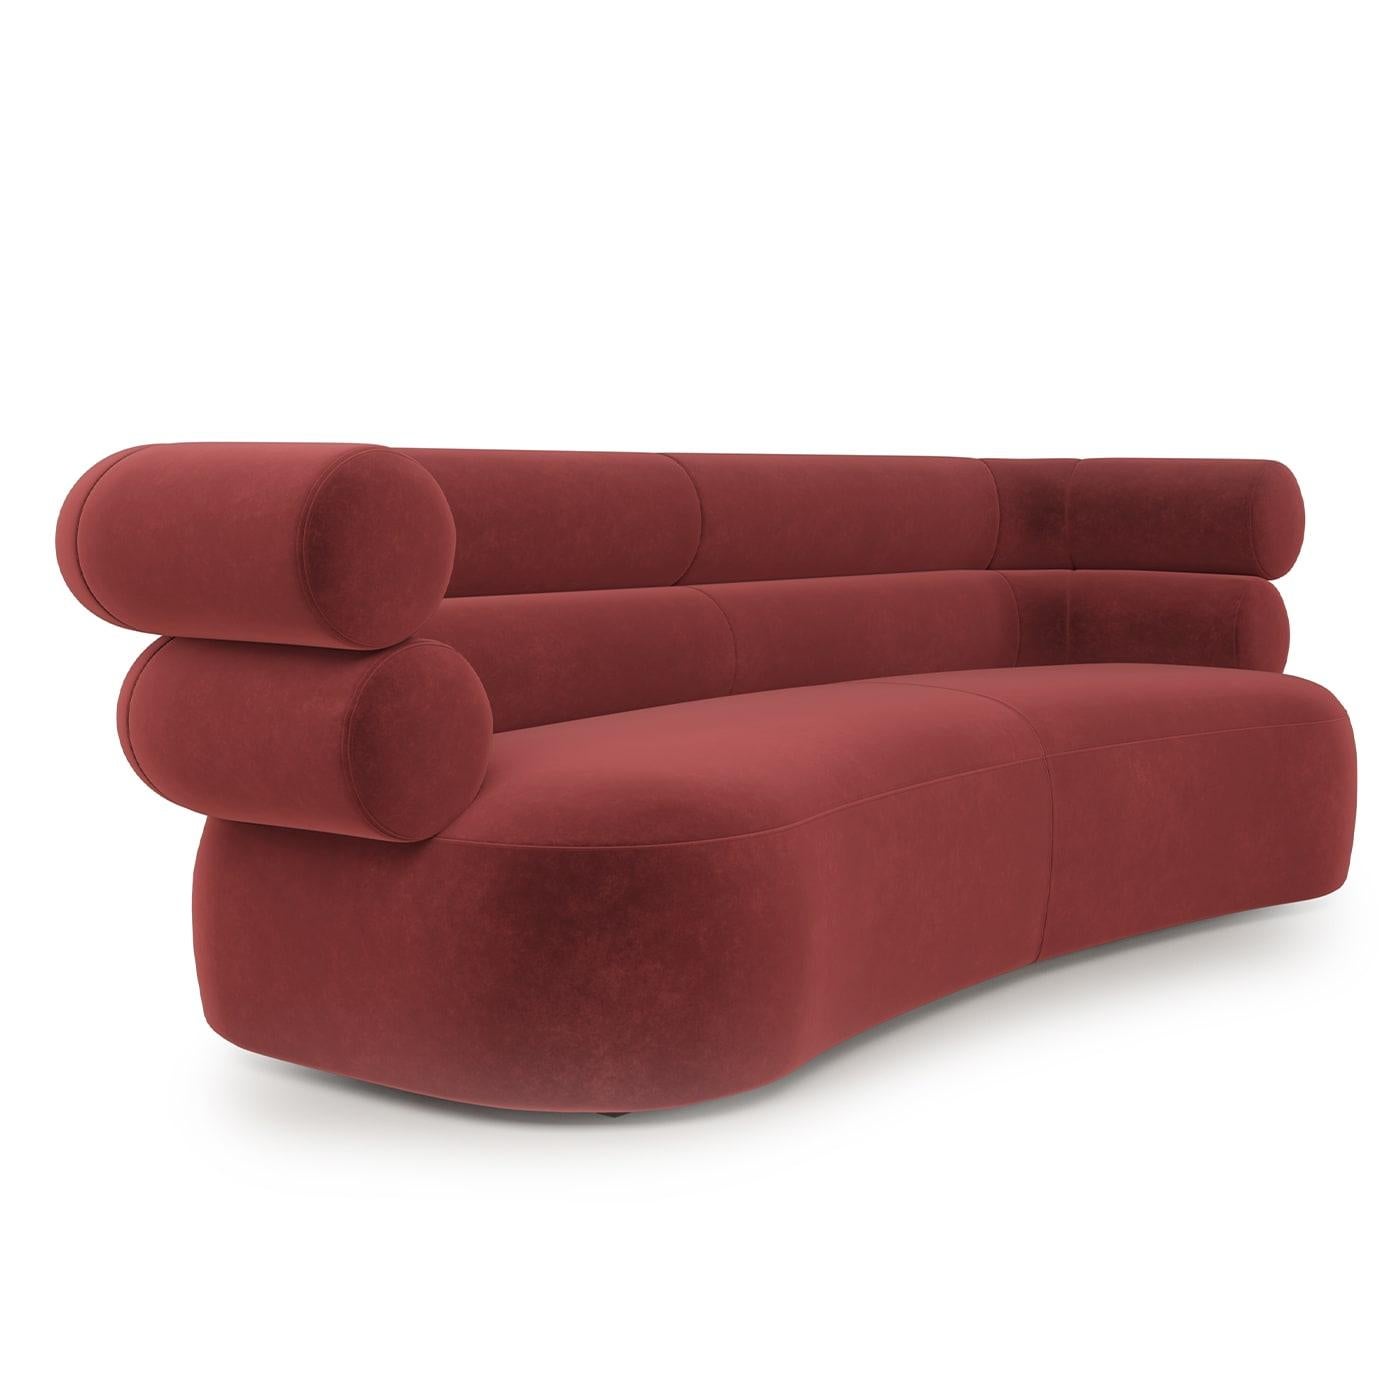 A sumptuous piece sure to make a statement in modern living spaces, this sofa flaunts a ruby-red polyester velvet upholstery wrapped around a series of plump, geometric-inspired volumes. A rich polyurethane foam padding complements the plywood